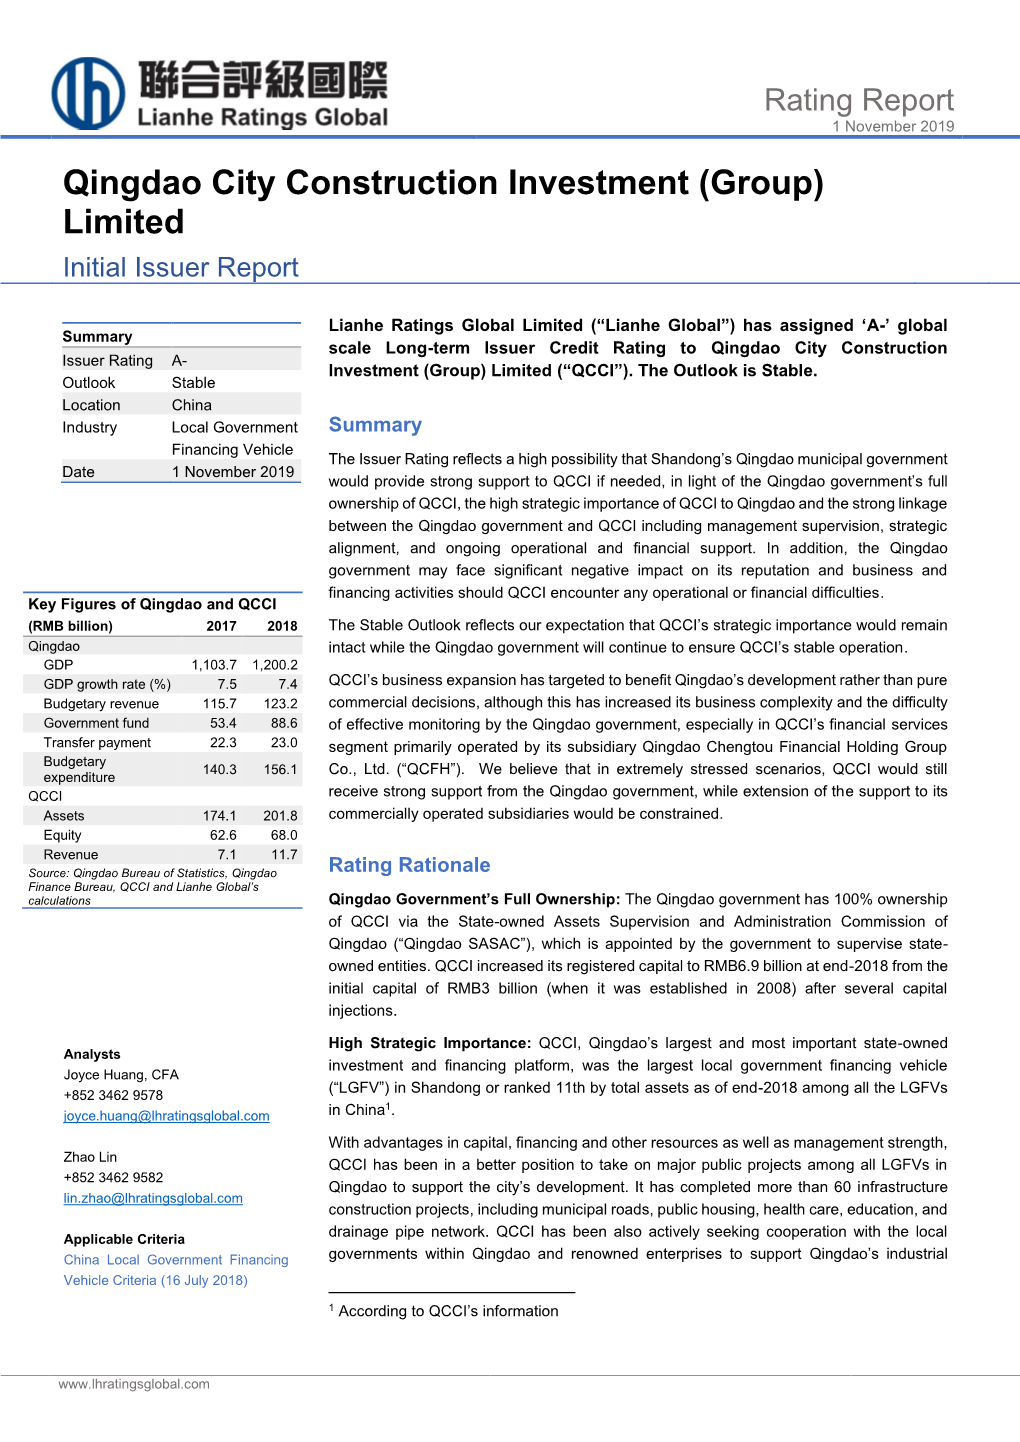 Qingdao City Construction Investment (Group) Limited Initial Issuer Report